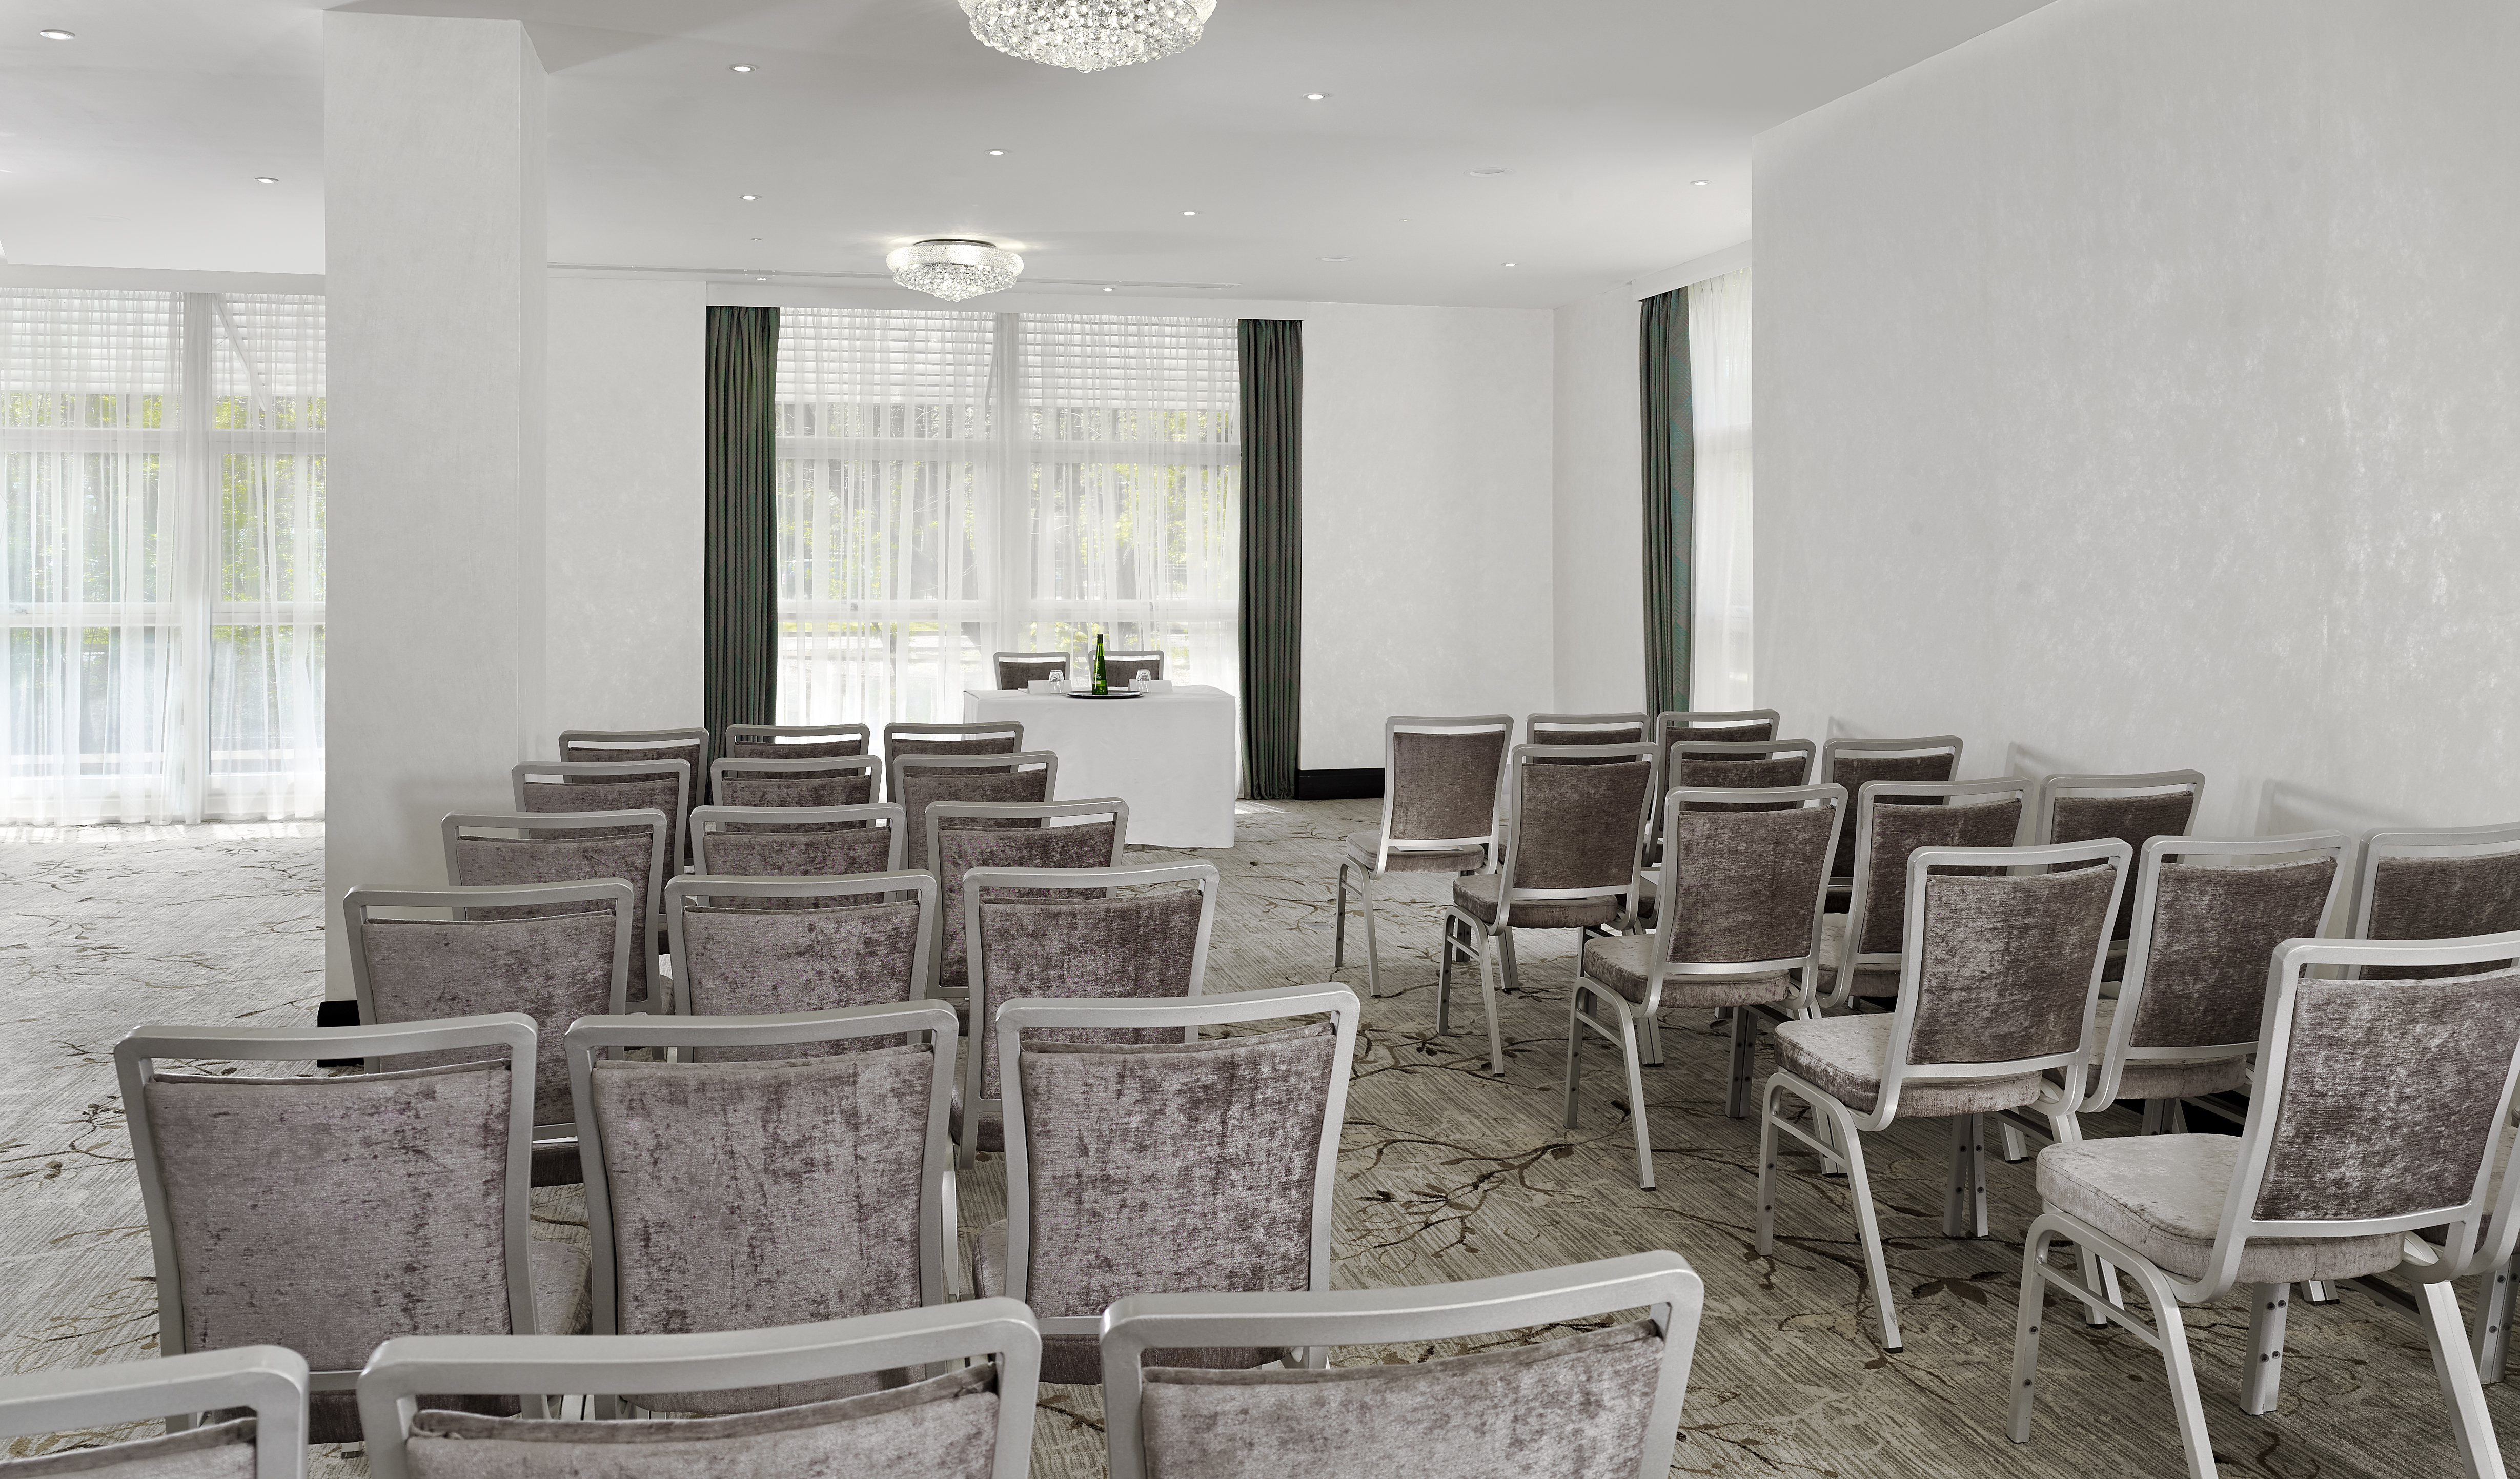 Garden Suite Arranged Theater Style With Rows of Chairs Facing a Table and Windows